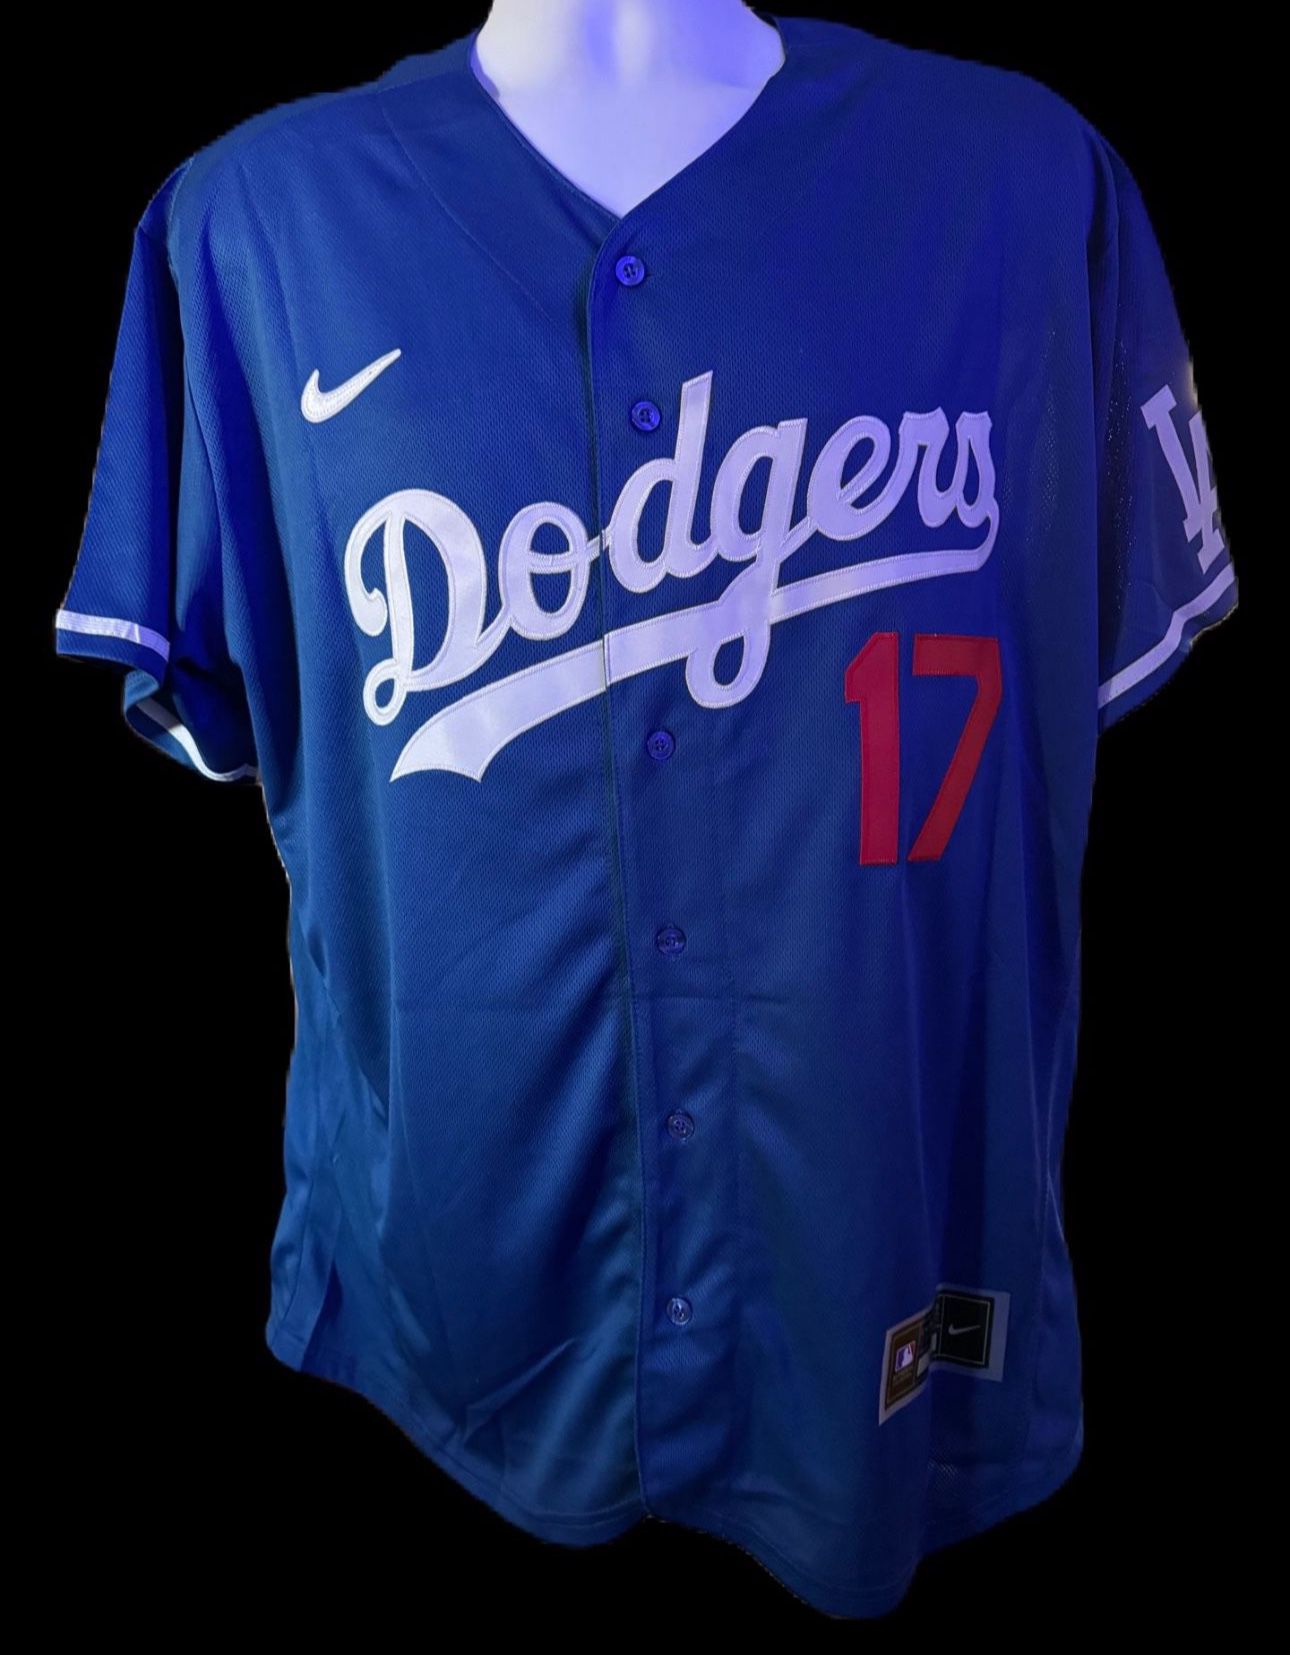 Shohei Ohtani #17 Los Angeles Dodgers Men's XL Jersey Stitched New